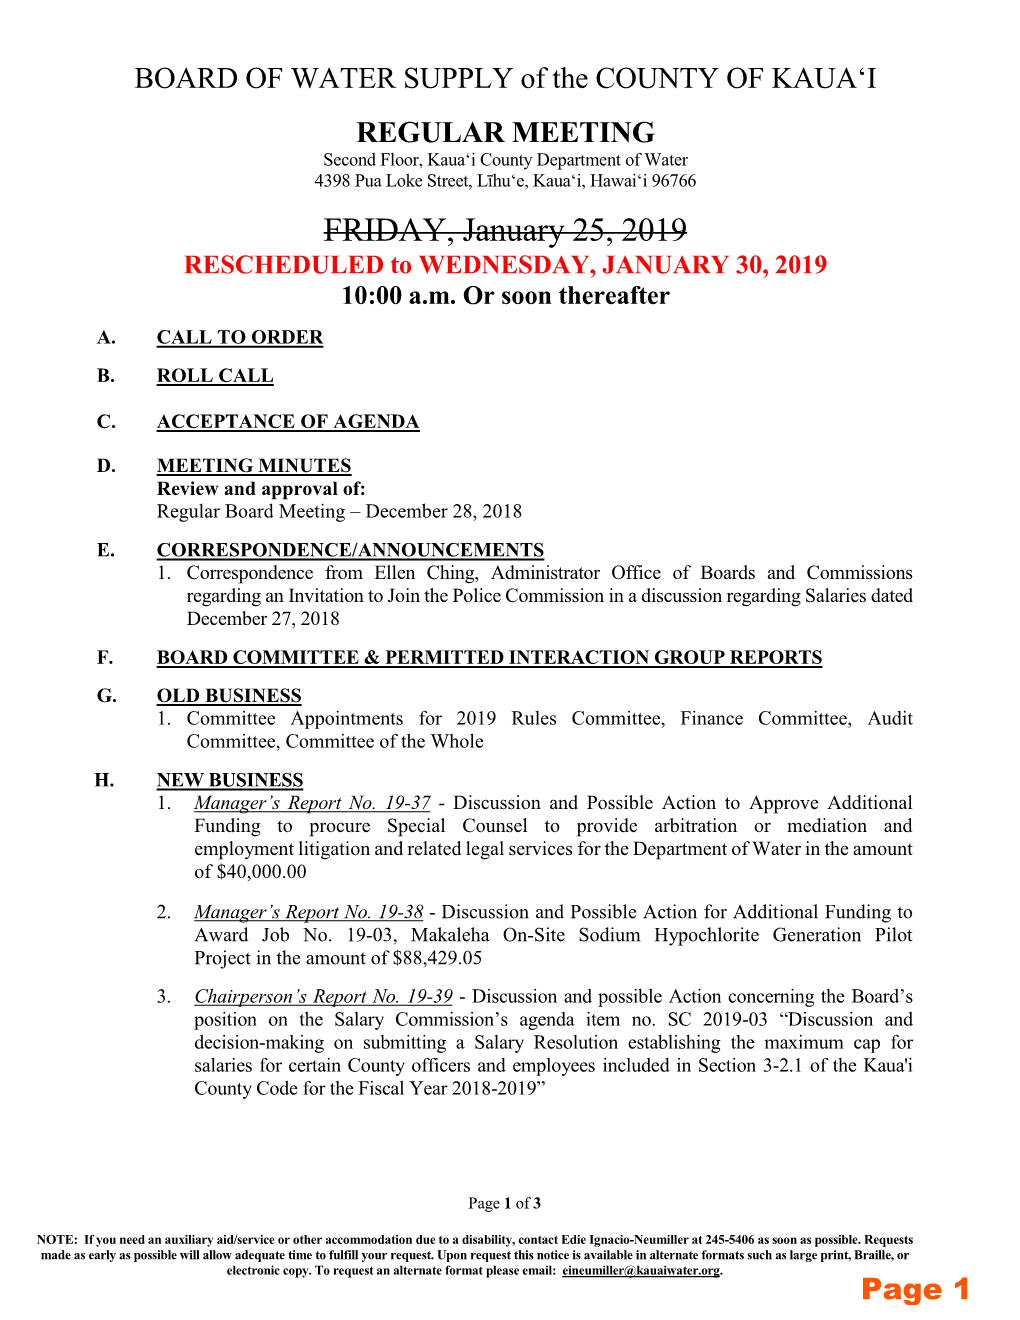 FRIDAY, January 25, 2019 RESCHEDULED to WEDNESDAY, JANUARY 30, 2019 10:00 A.M